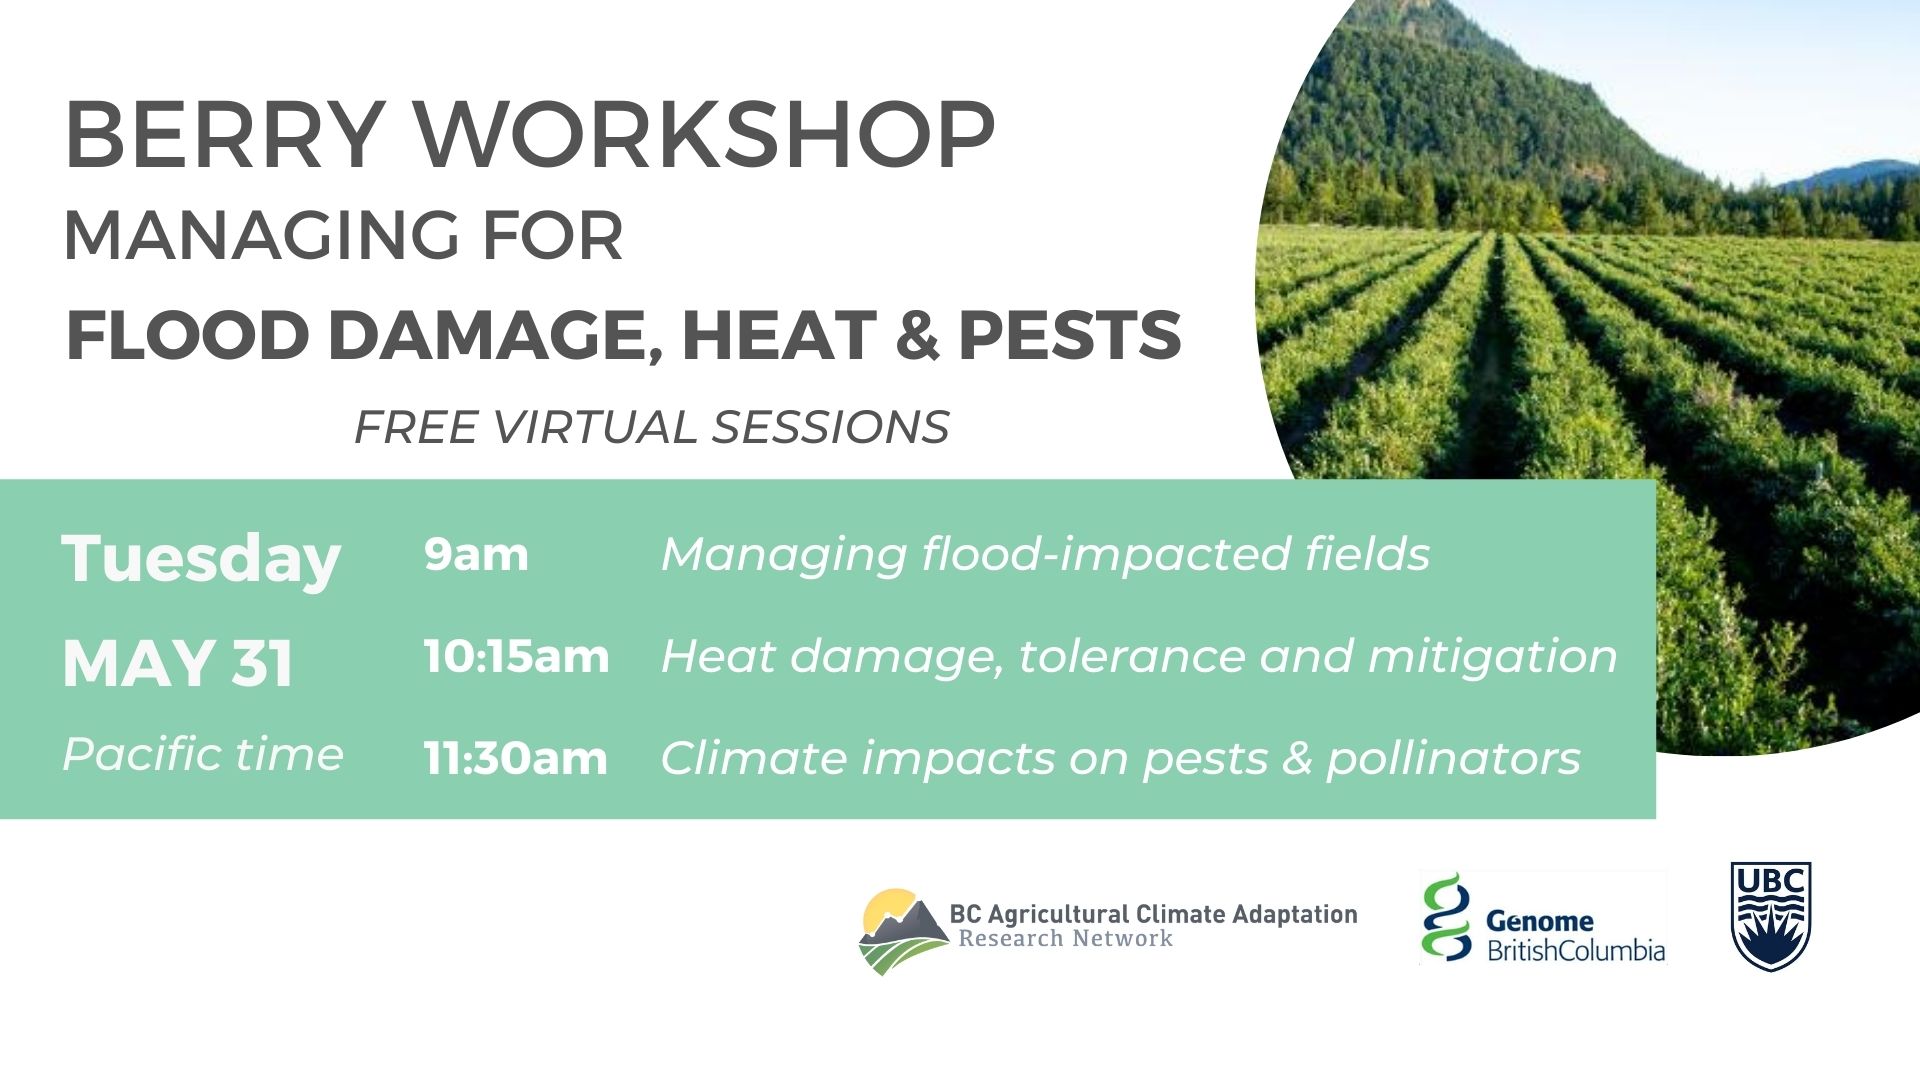 Berry Workshop: Managing for flood damage, extreme heat and pests